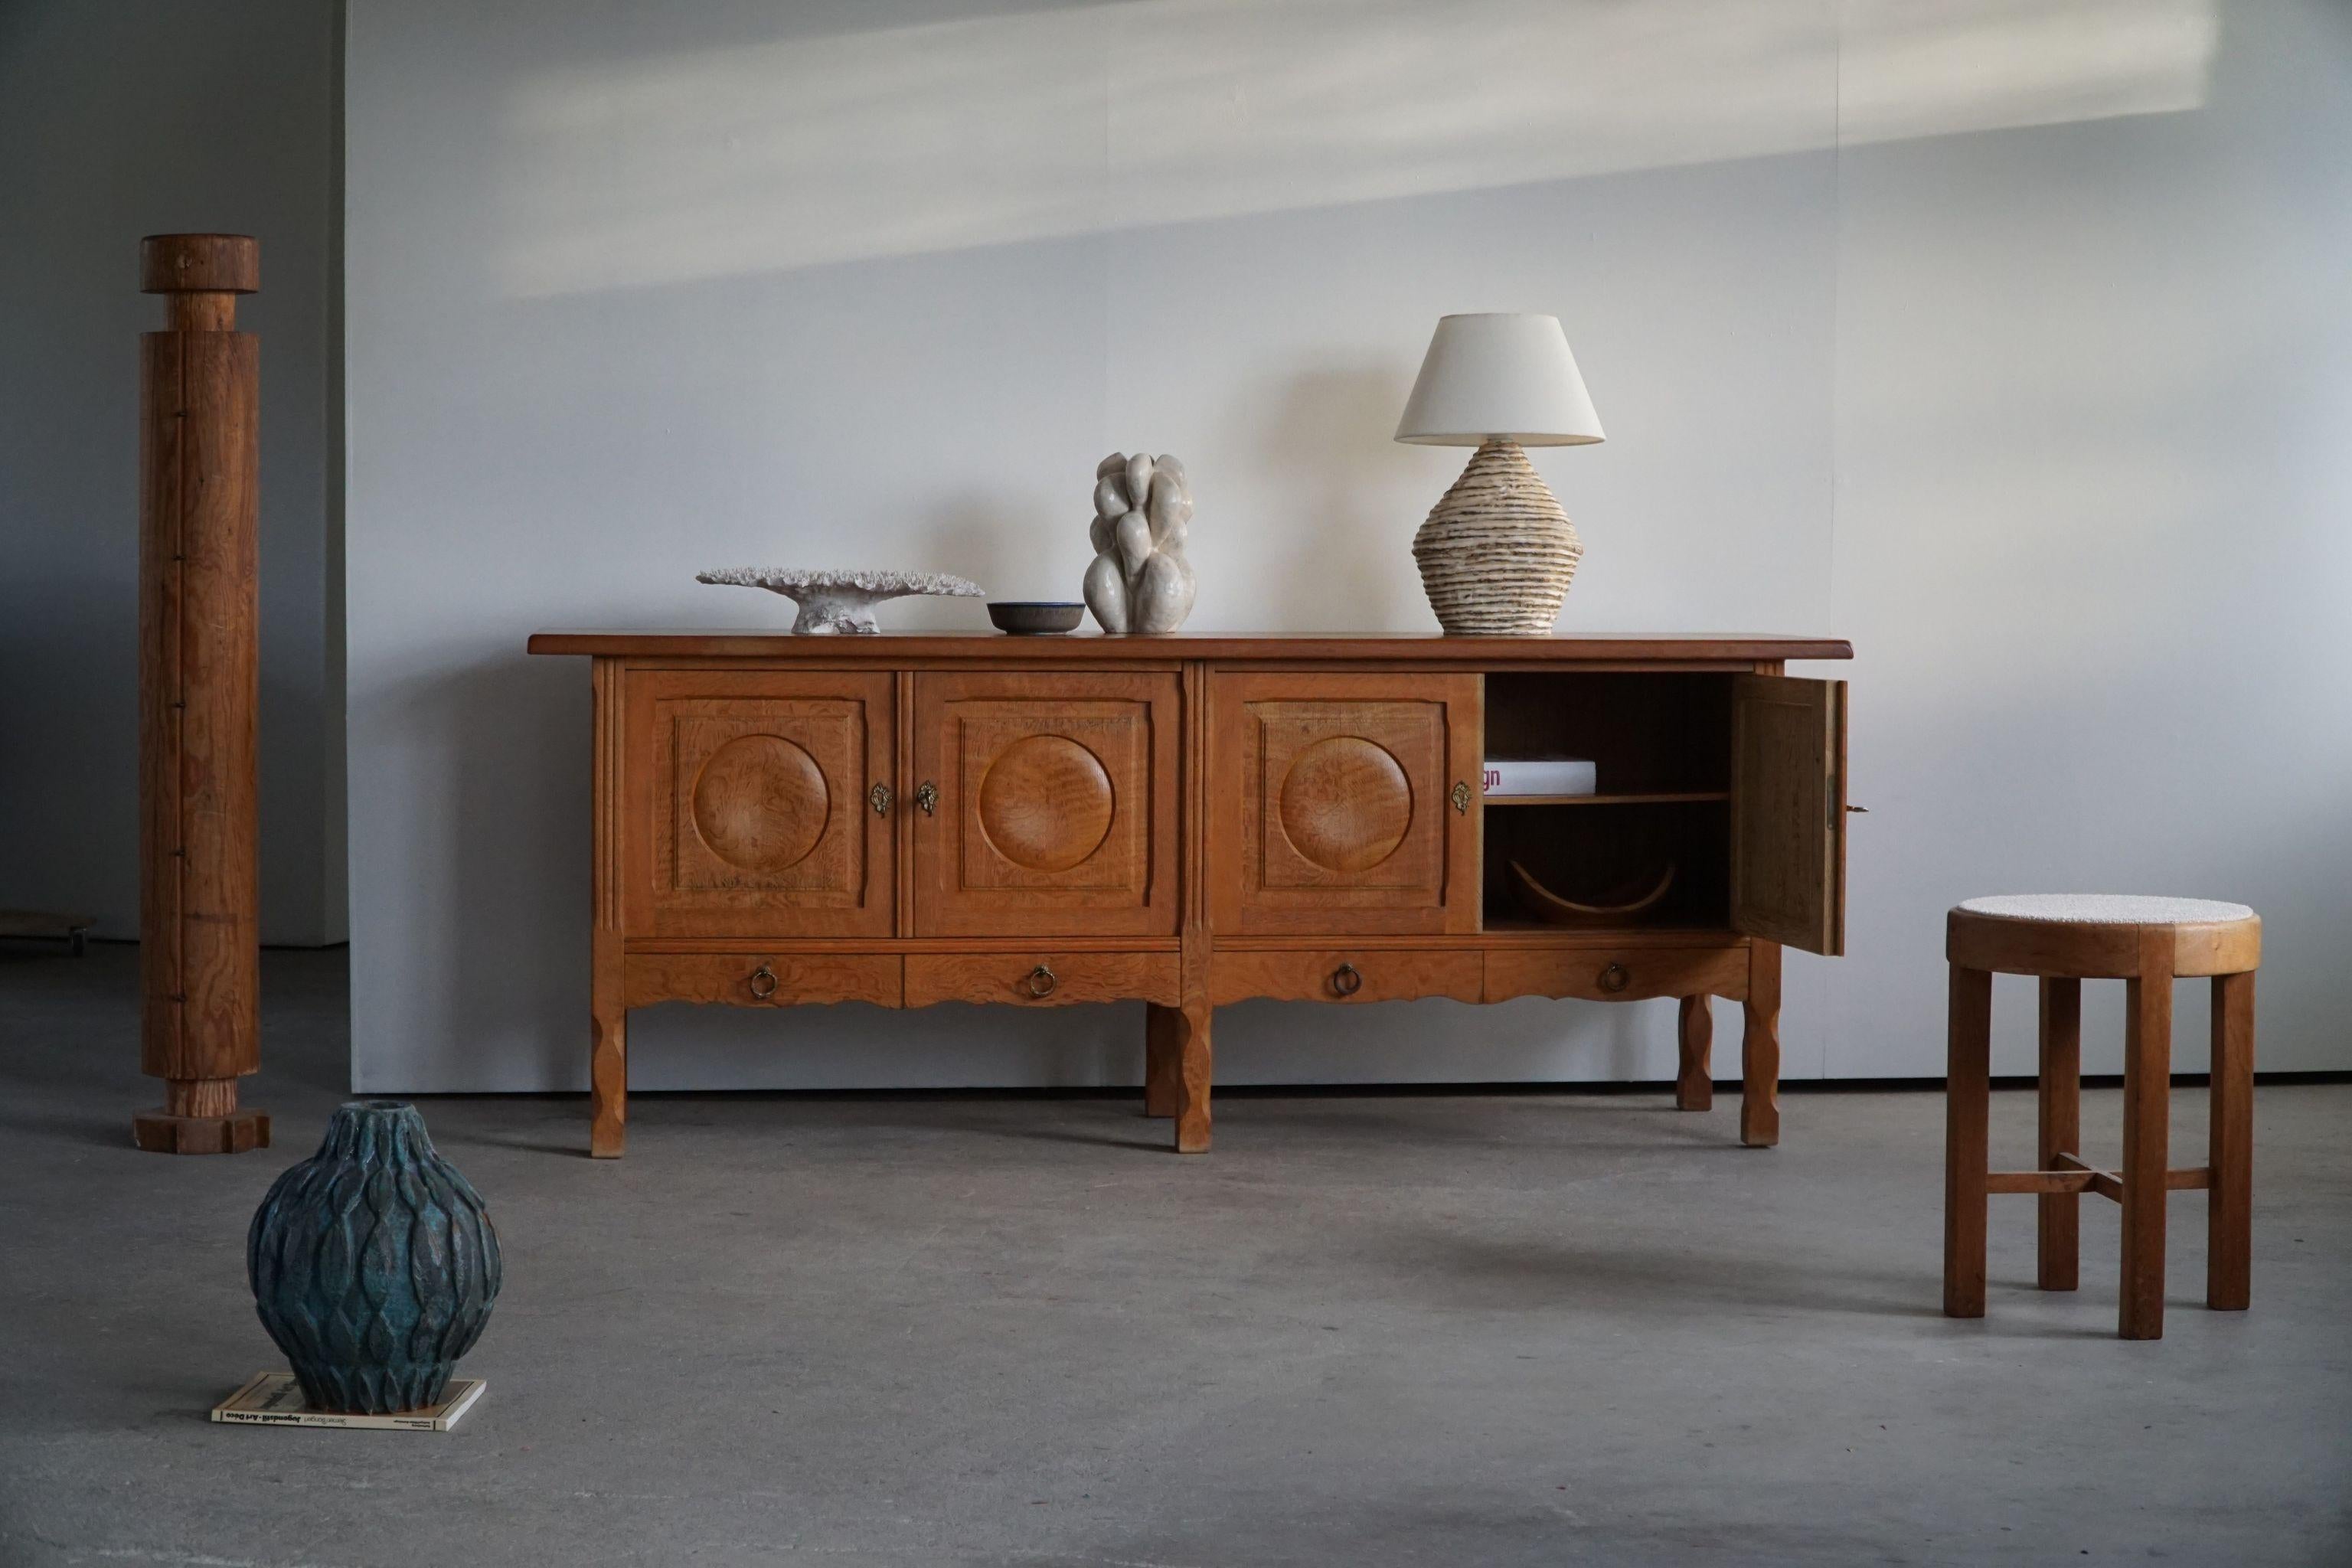 Fantastic low Classic sideboard in solid oak. Made by a Danish Cabinetmaker, Anker Sørensen in 1960s. This piece is in a great vintage condition, with few signs of wear on the surface.

This brutalist object will fit into many interior styles. A